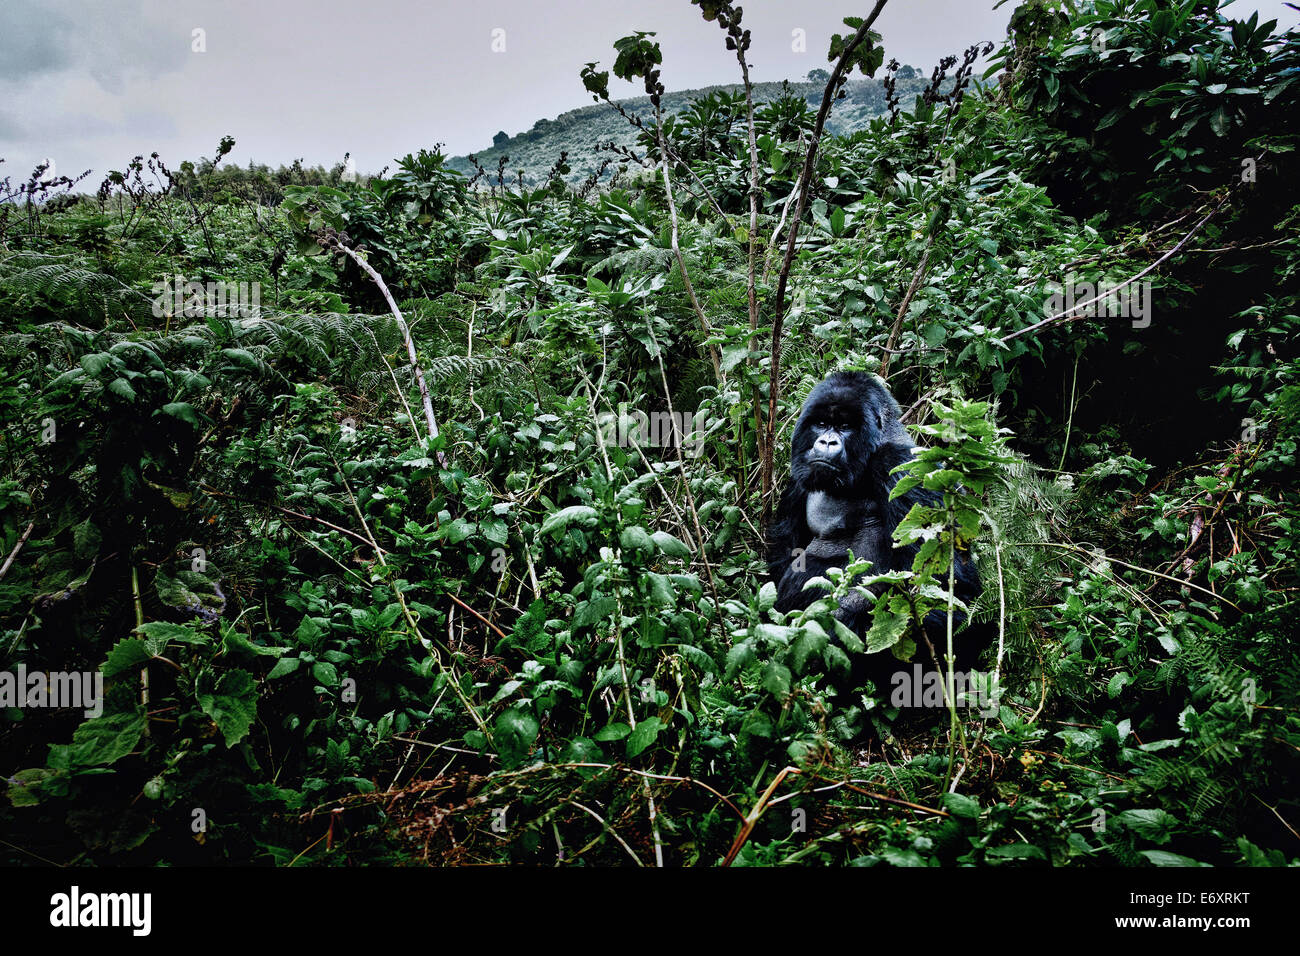 Silverback male mountain gorilla in the jungle of the Volcanoes National Park, Ruanda, Africa Stock Photo